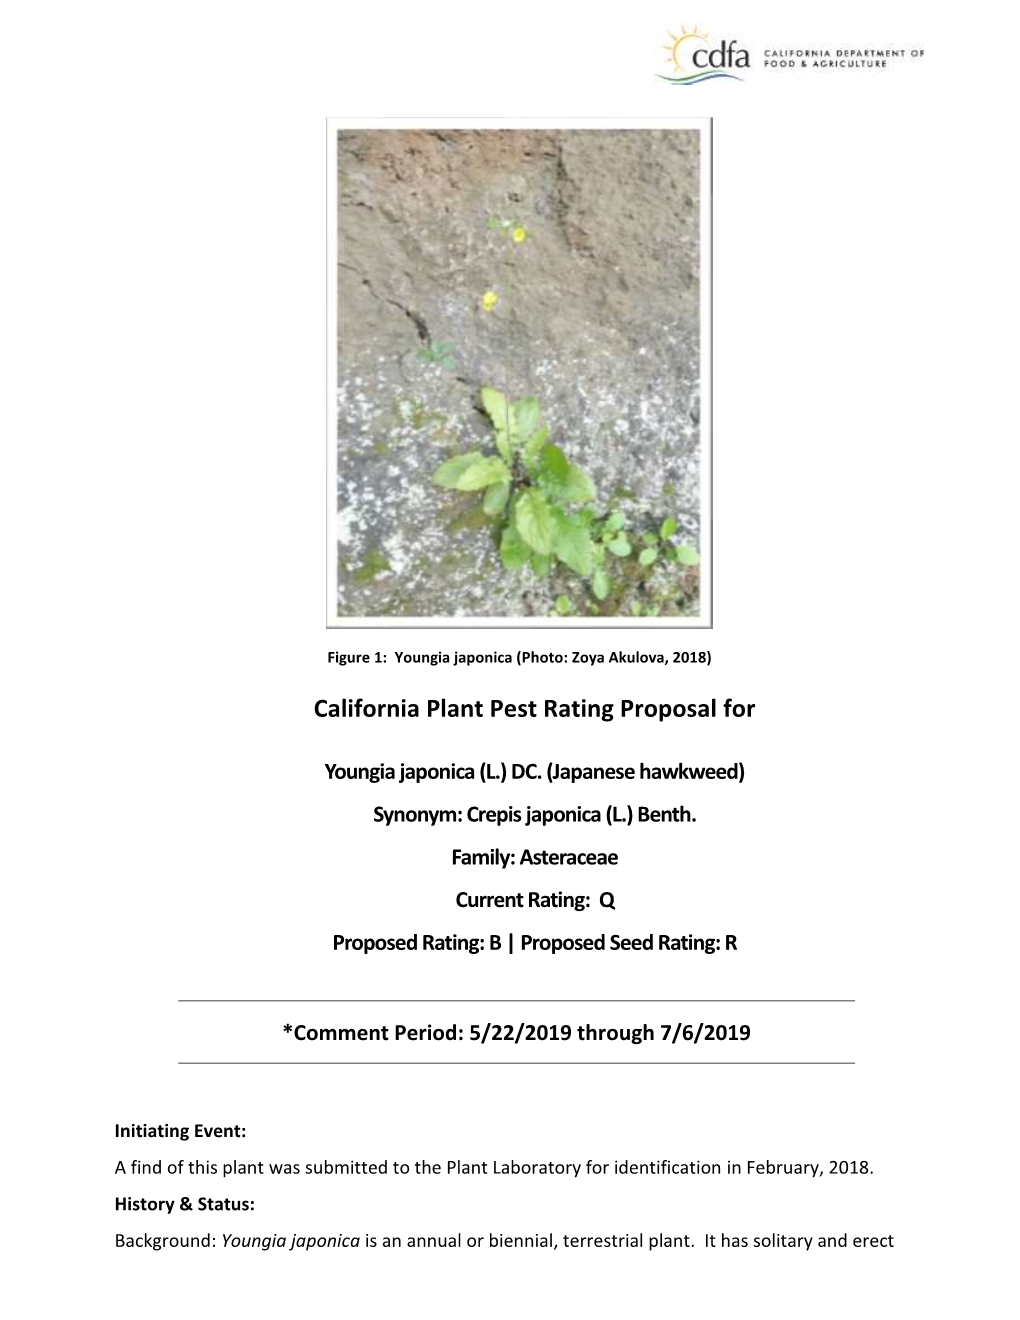 California Plant Pest Rating Proposal For